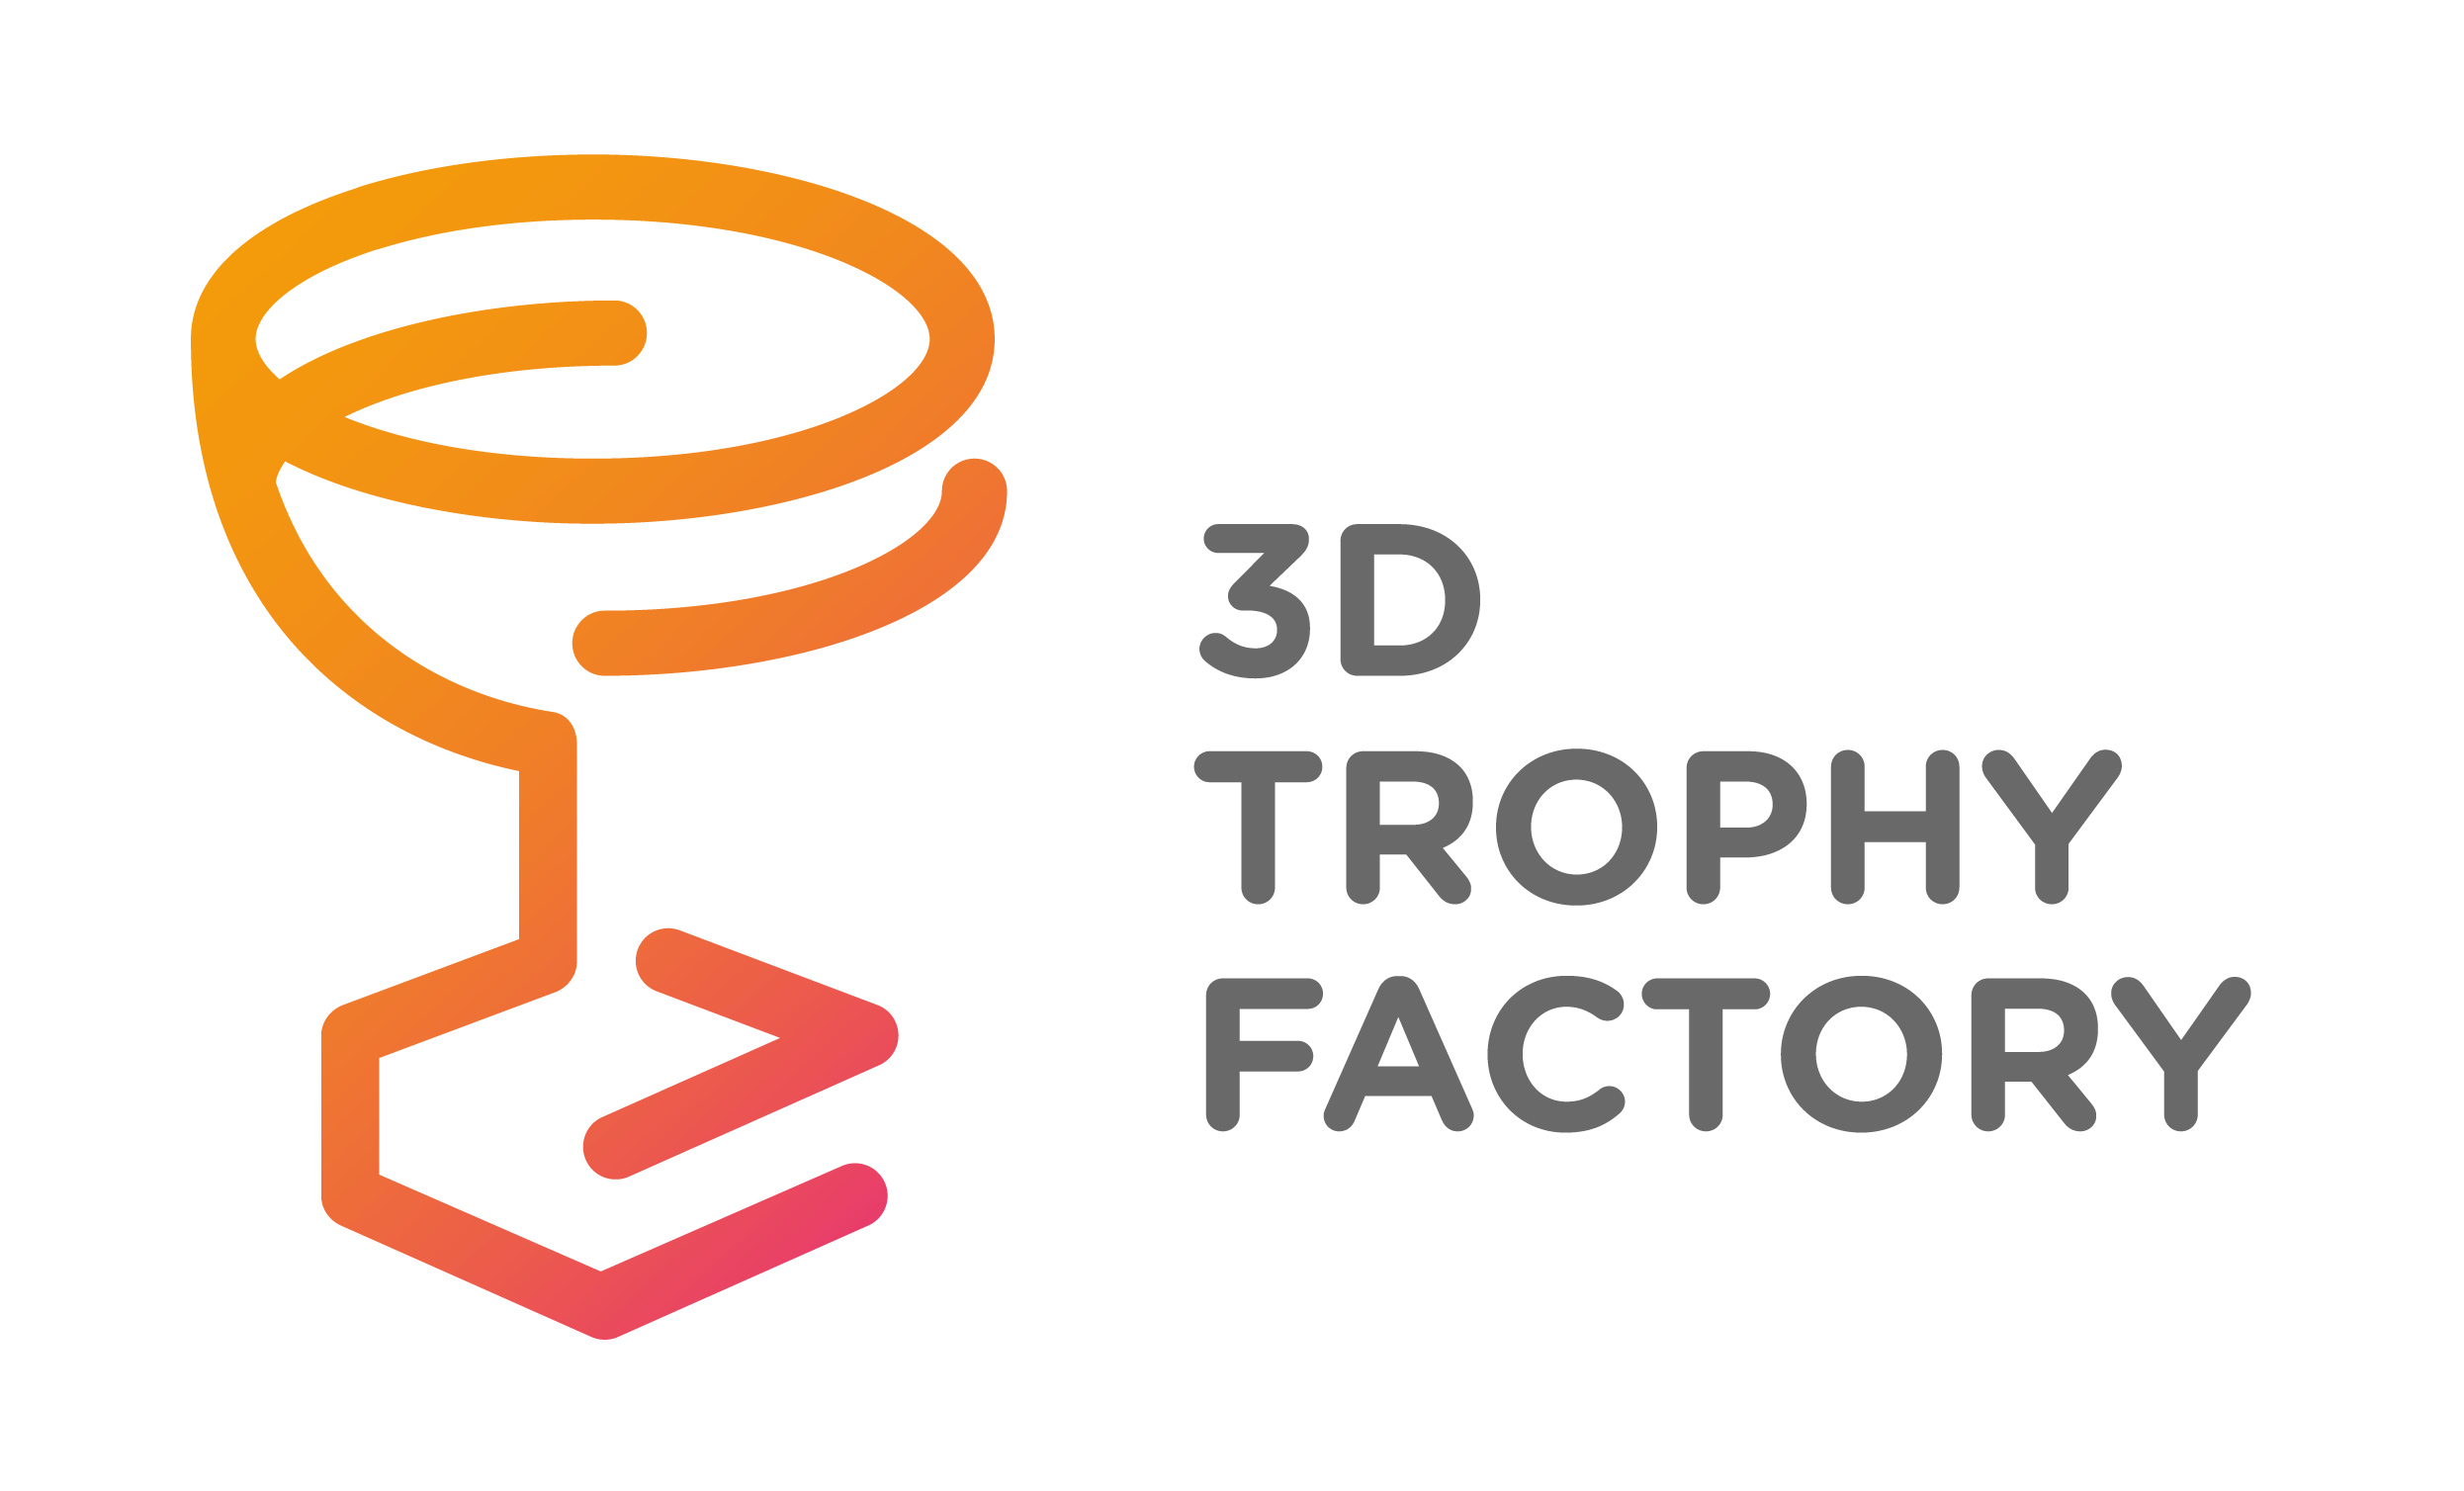 Trophies Logo - Check out our new trophy logo and website! - 3Dtrophyfactory